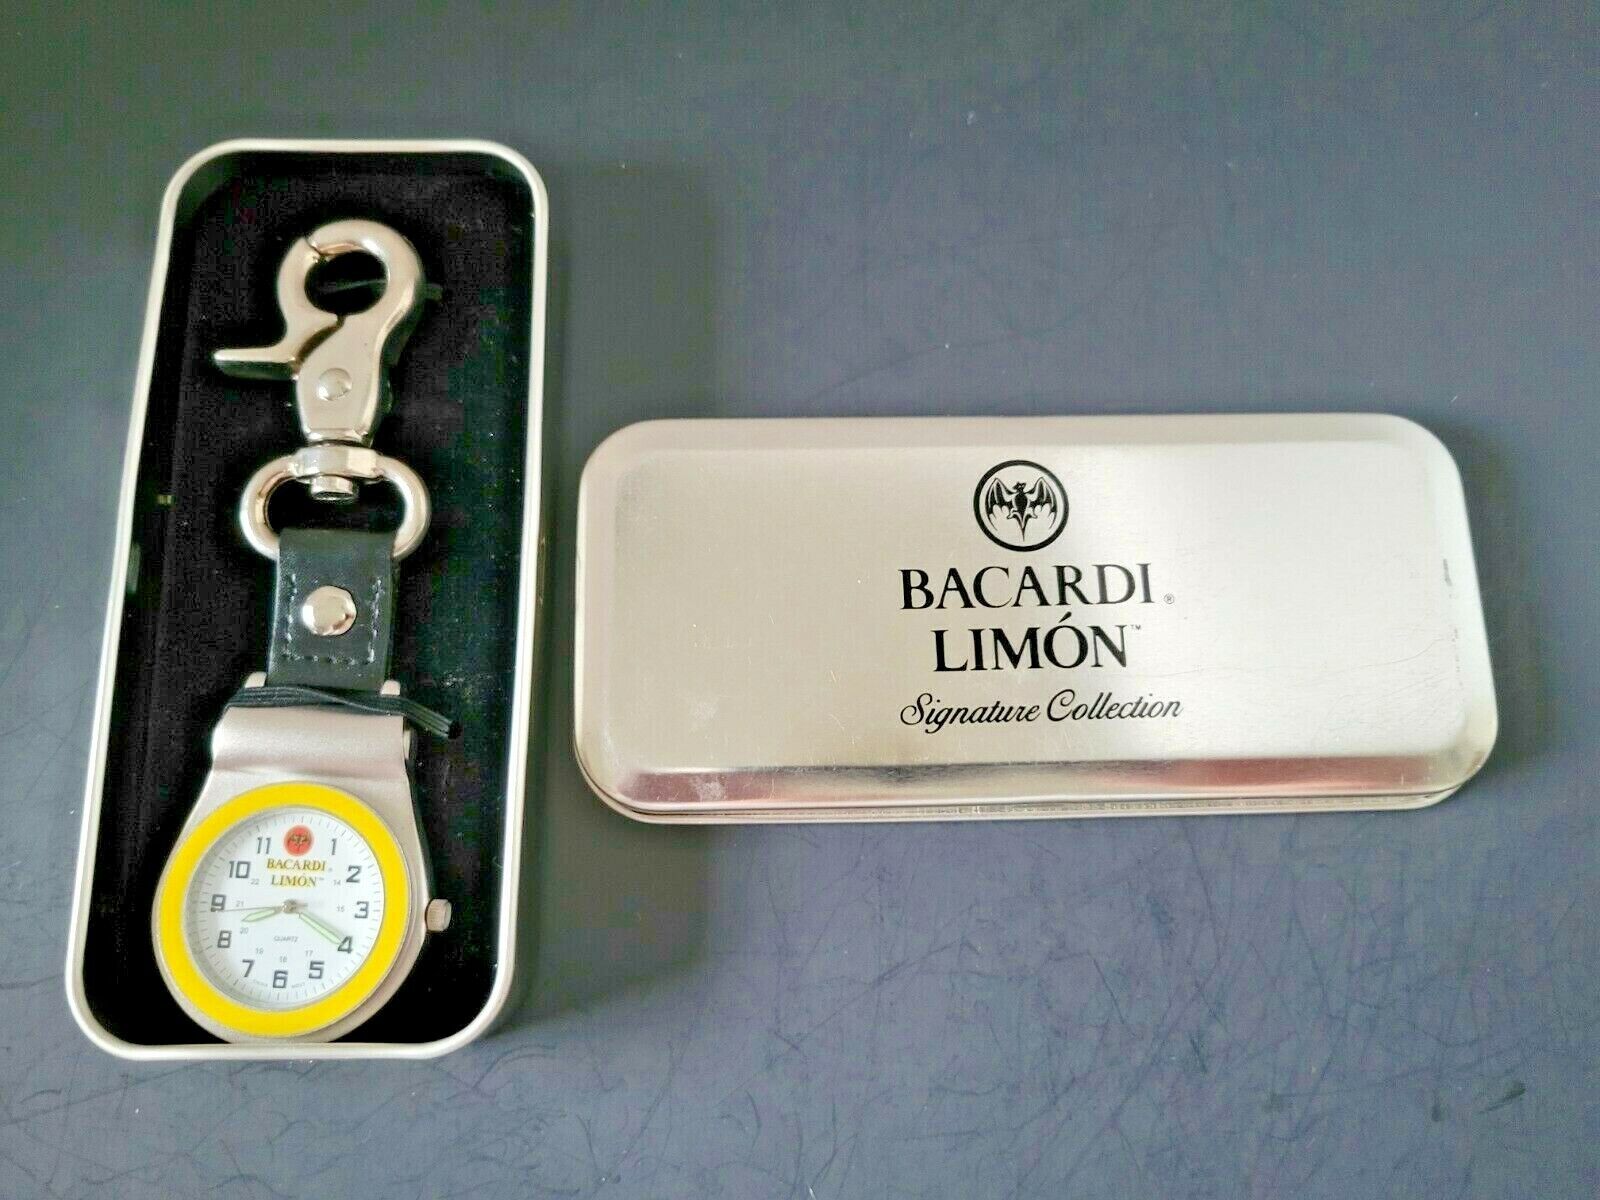 Signature Collection Bacardi Limon Bat Device Pocket Watch In Original Container